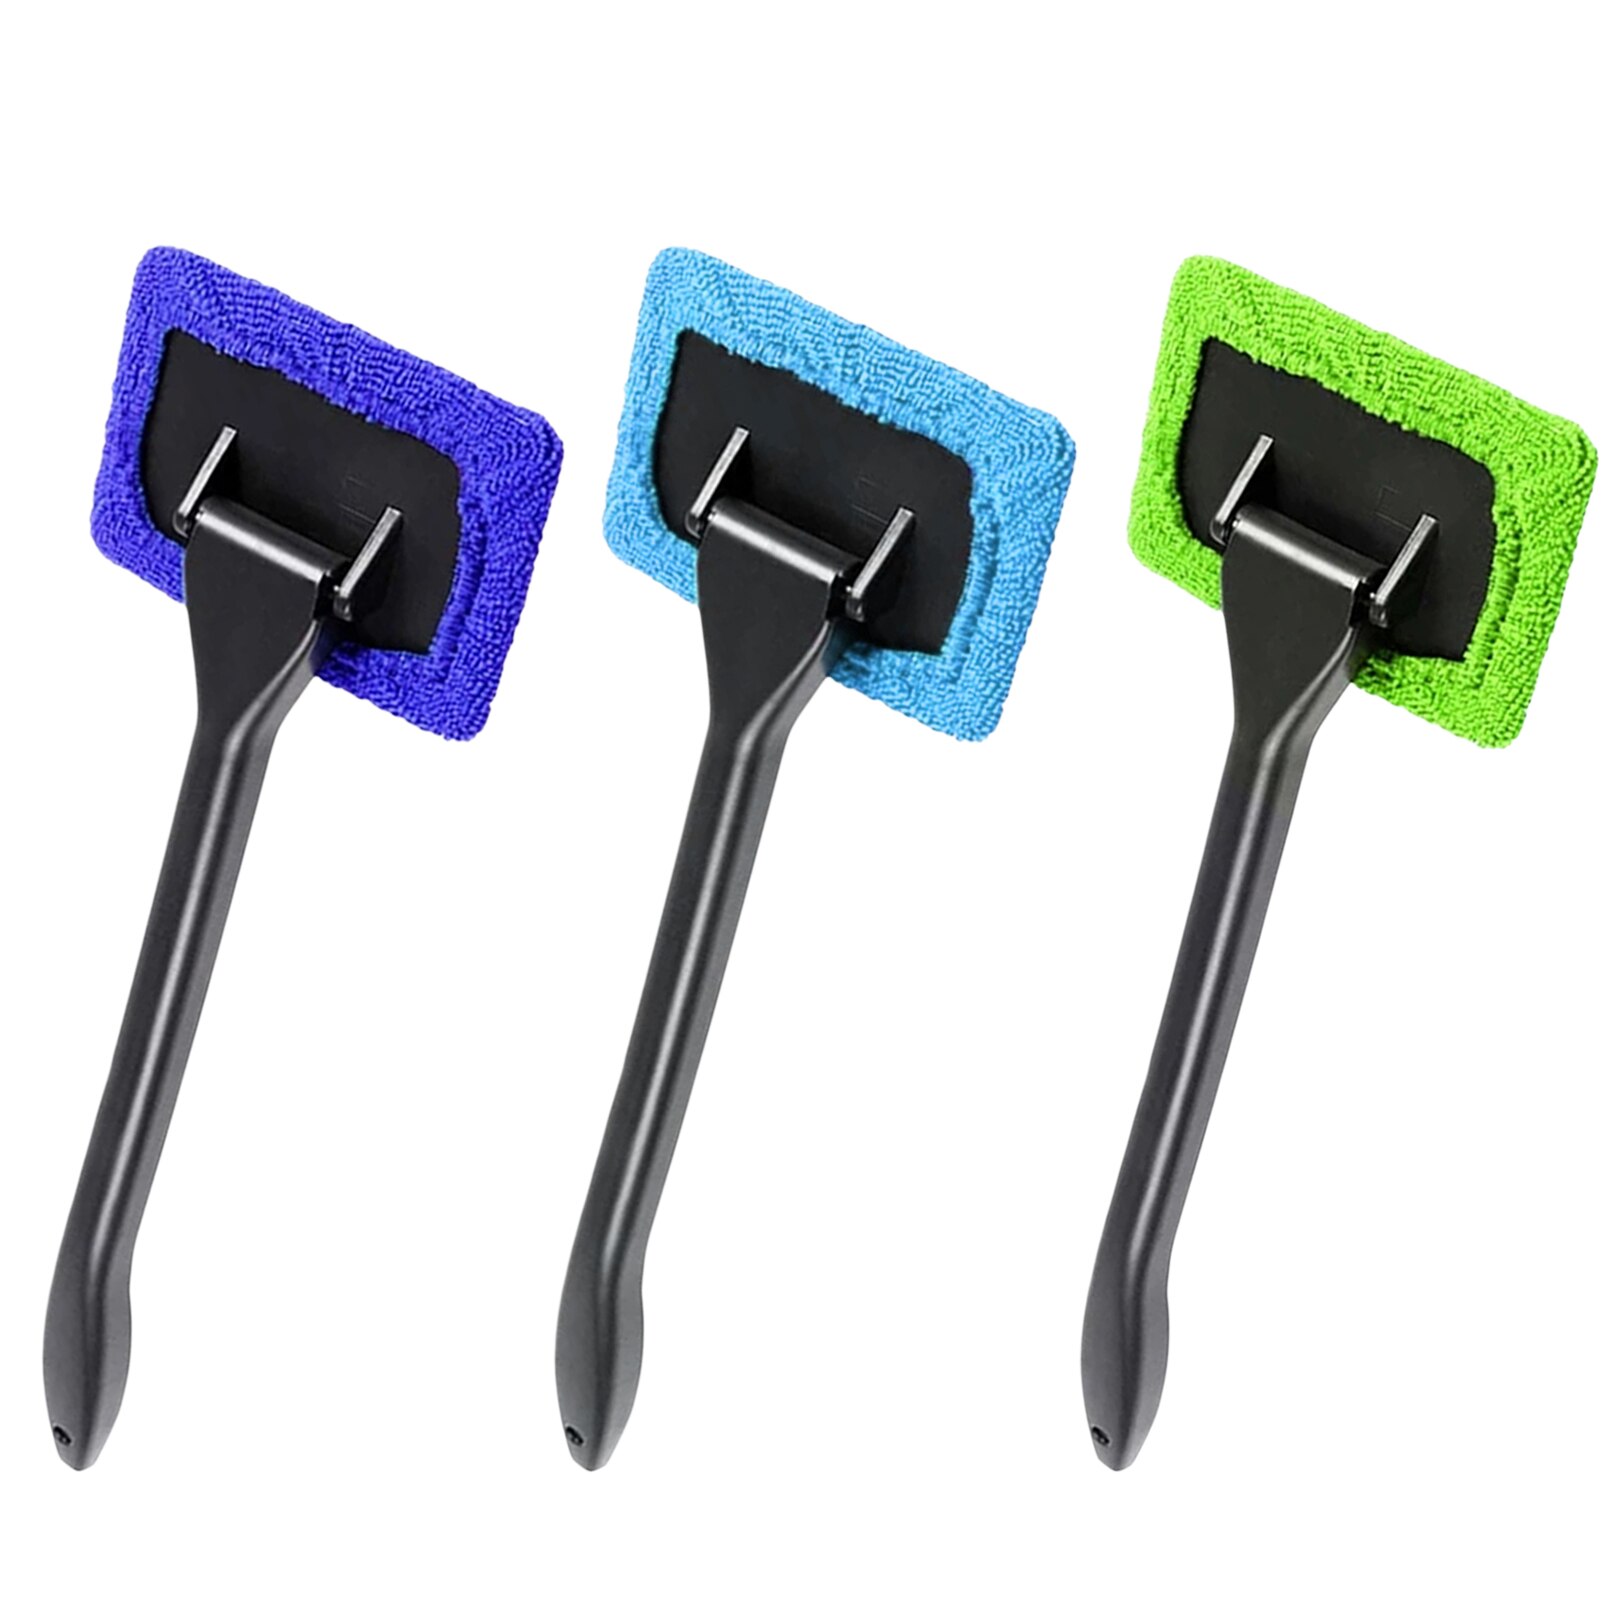 Auto Cleaning Wash Tool With Long Handle Car Window Cleaner Washing Kit Windshield Wiper Microfiber Wiper Cleaner Cleaning Brush